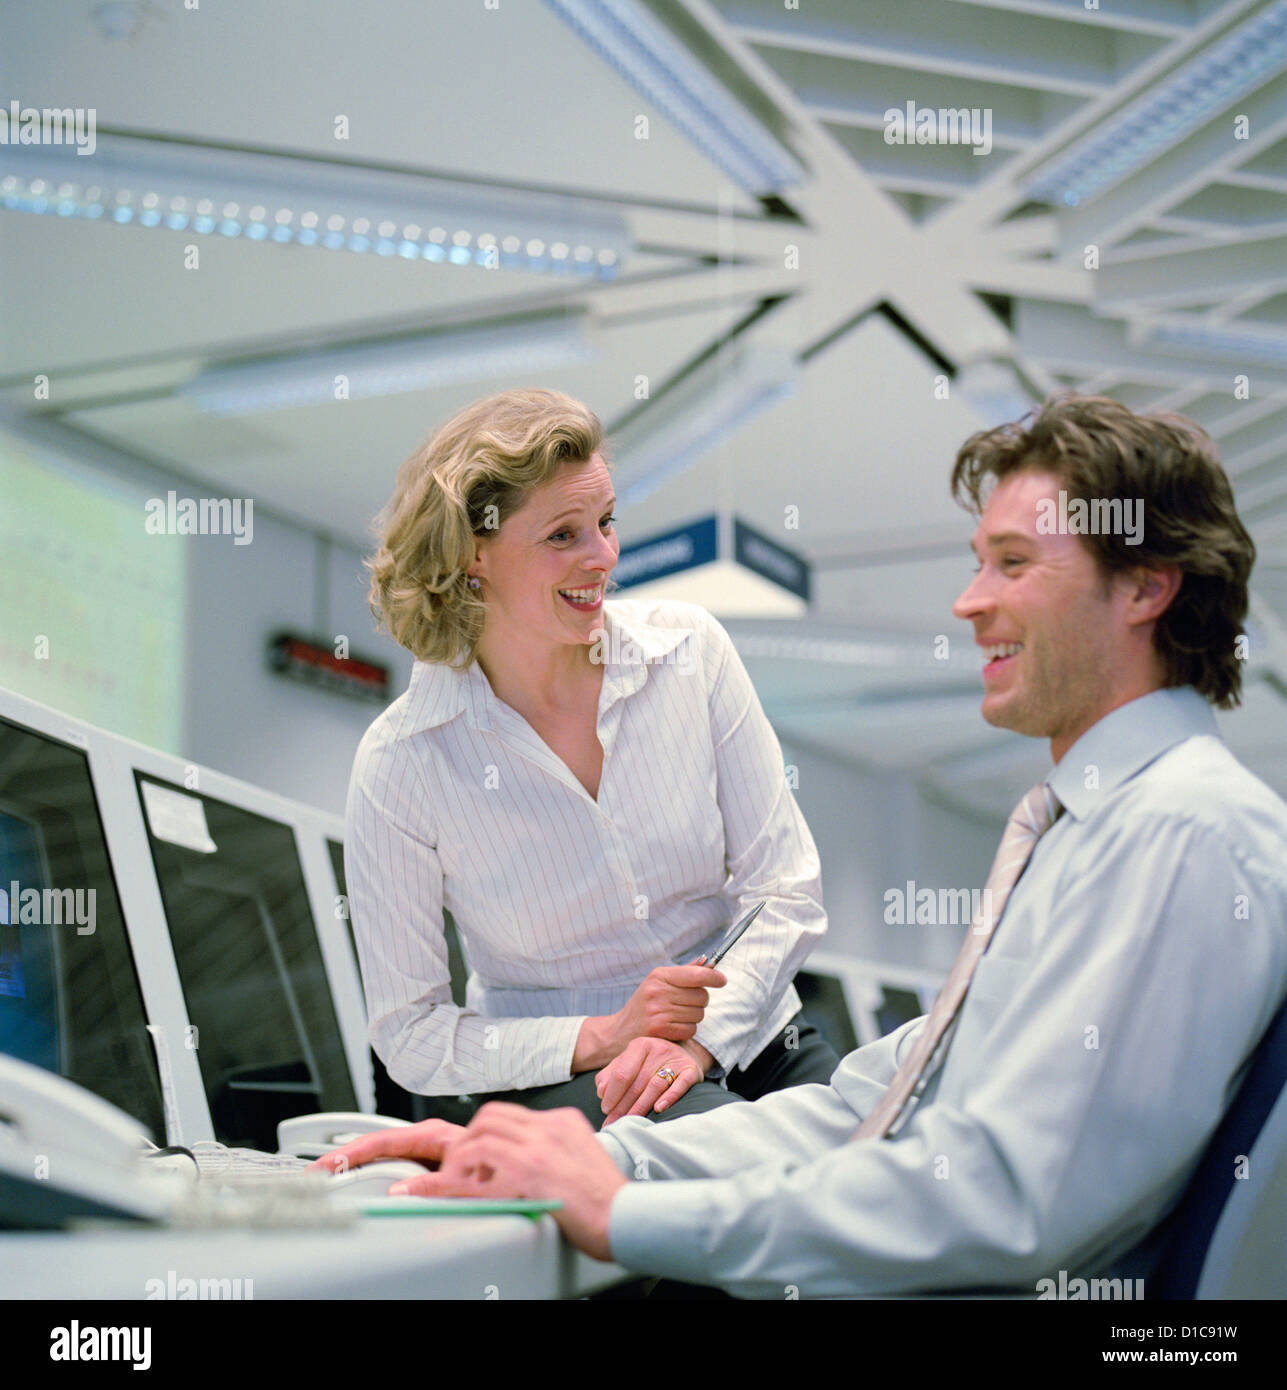 Business people data center control center man woman License free except ads and billboards Stock Photo